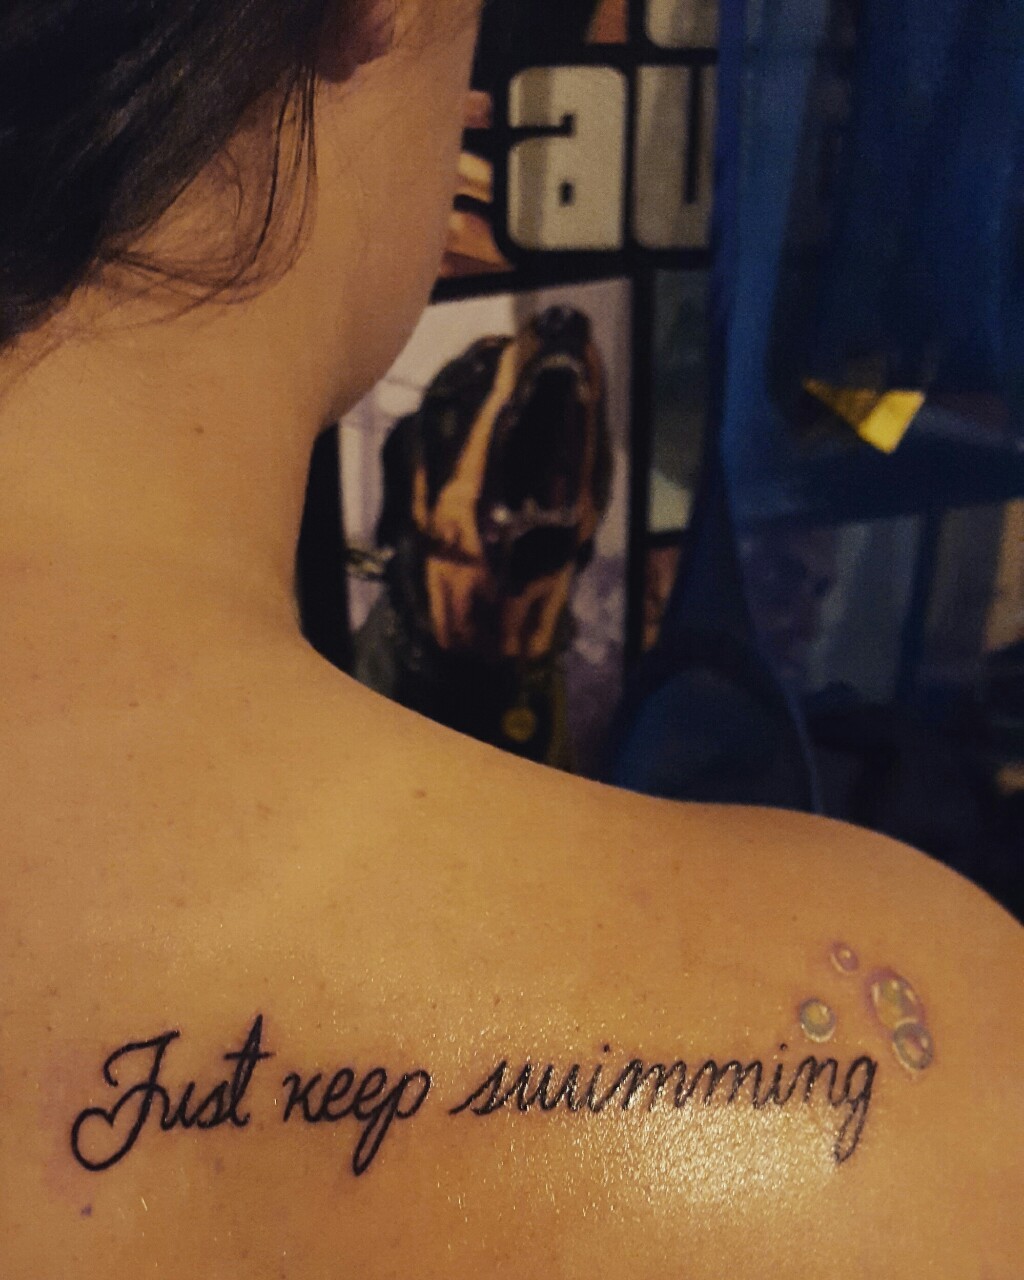 Just Keep Swimming  tattoo words download free scetch